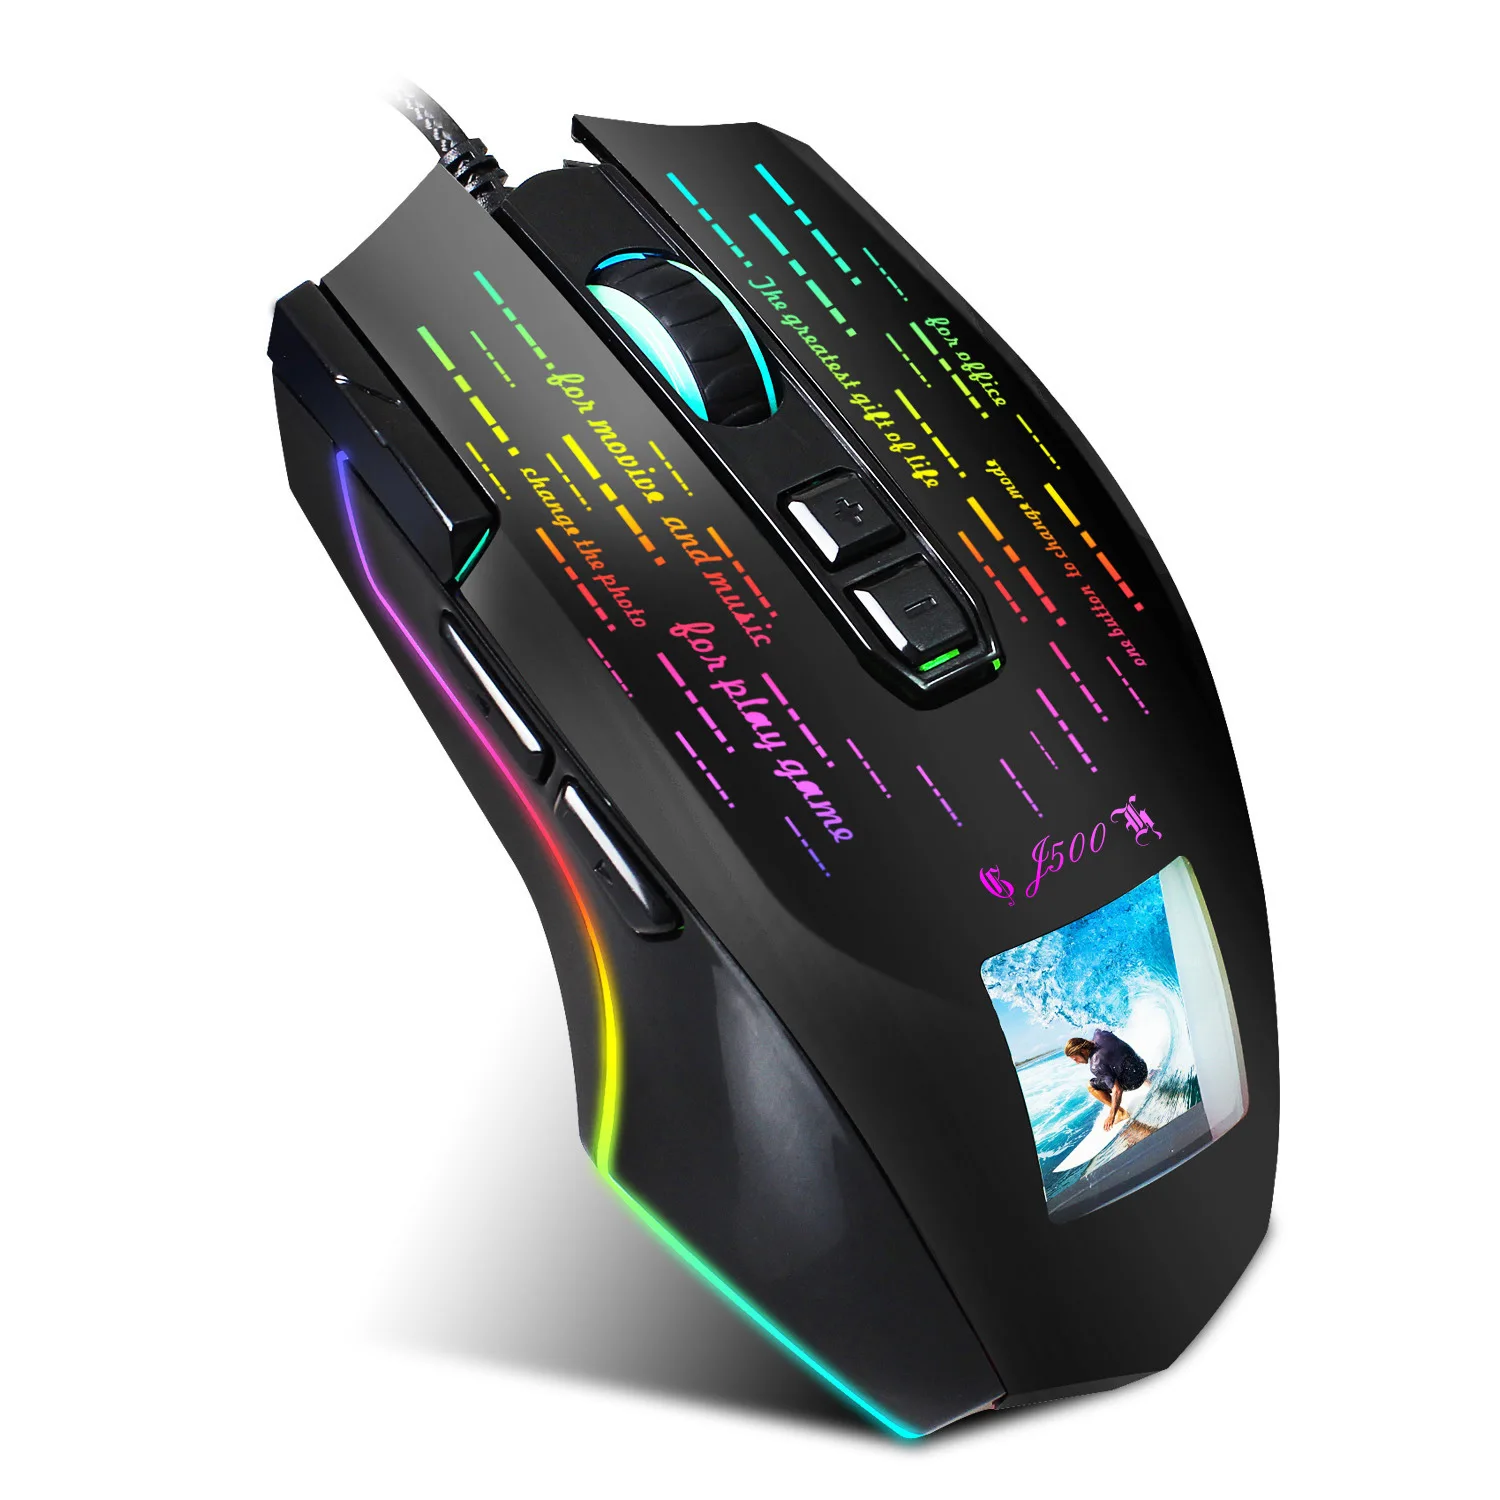 

7 Button Wried Optical Mice RGB Gaming Mouse Gamer Programming 5000DPI USB Computer Backlit Breathe LED for PC Laptop